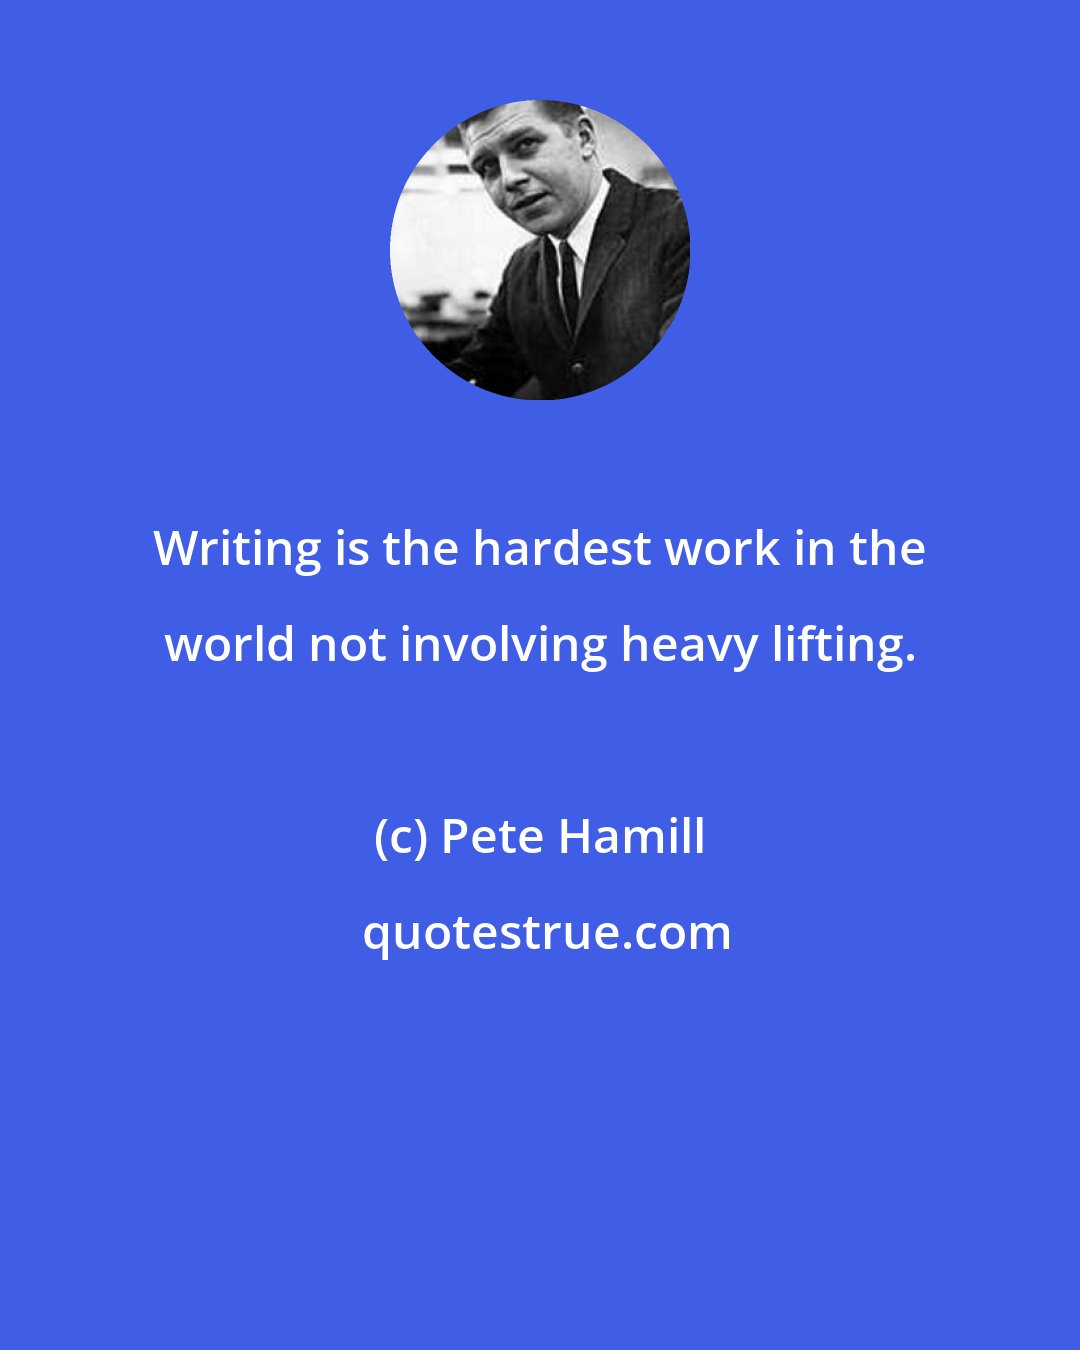 Pete Hamill: Writing is the hardest work in the world not involving heavy lifting.